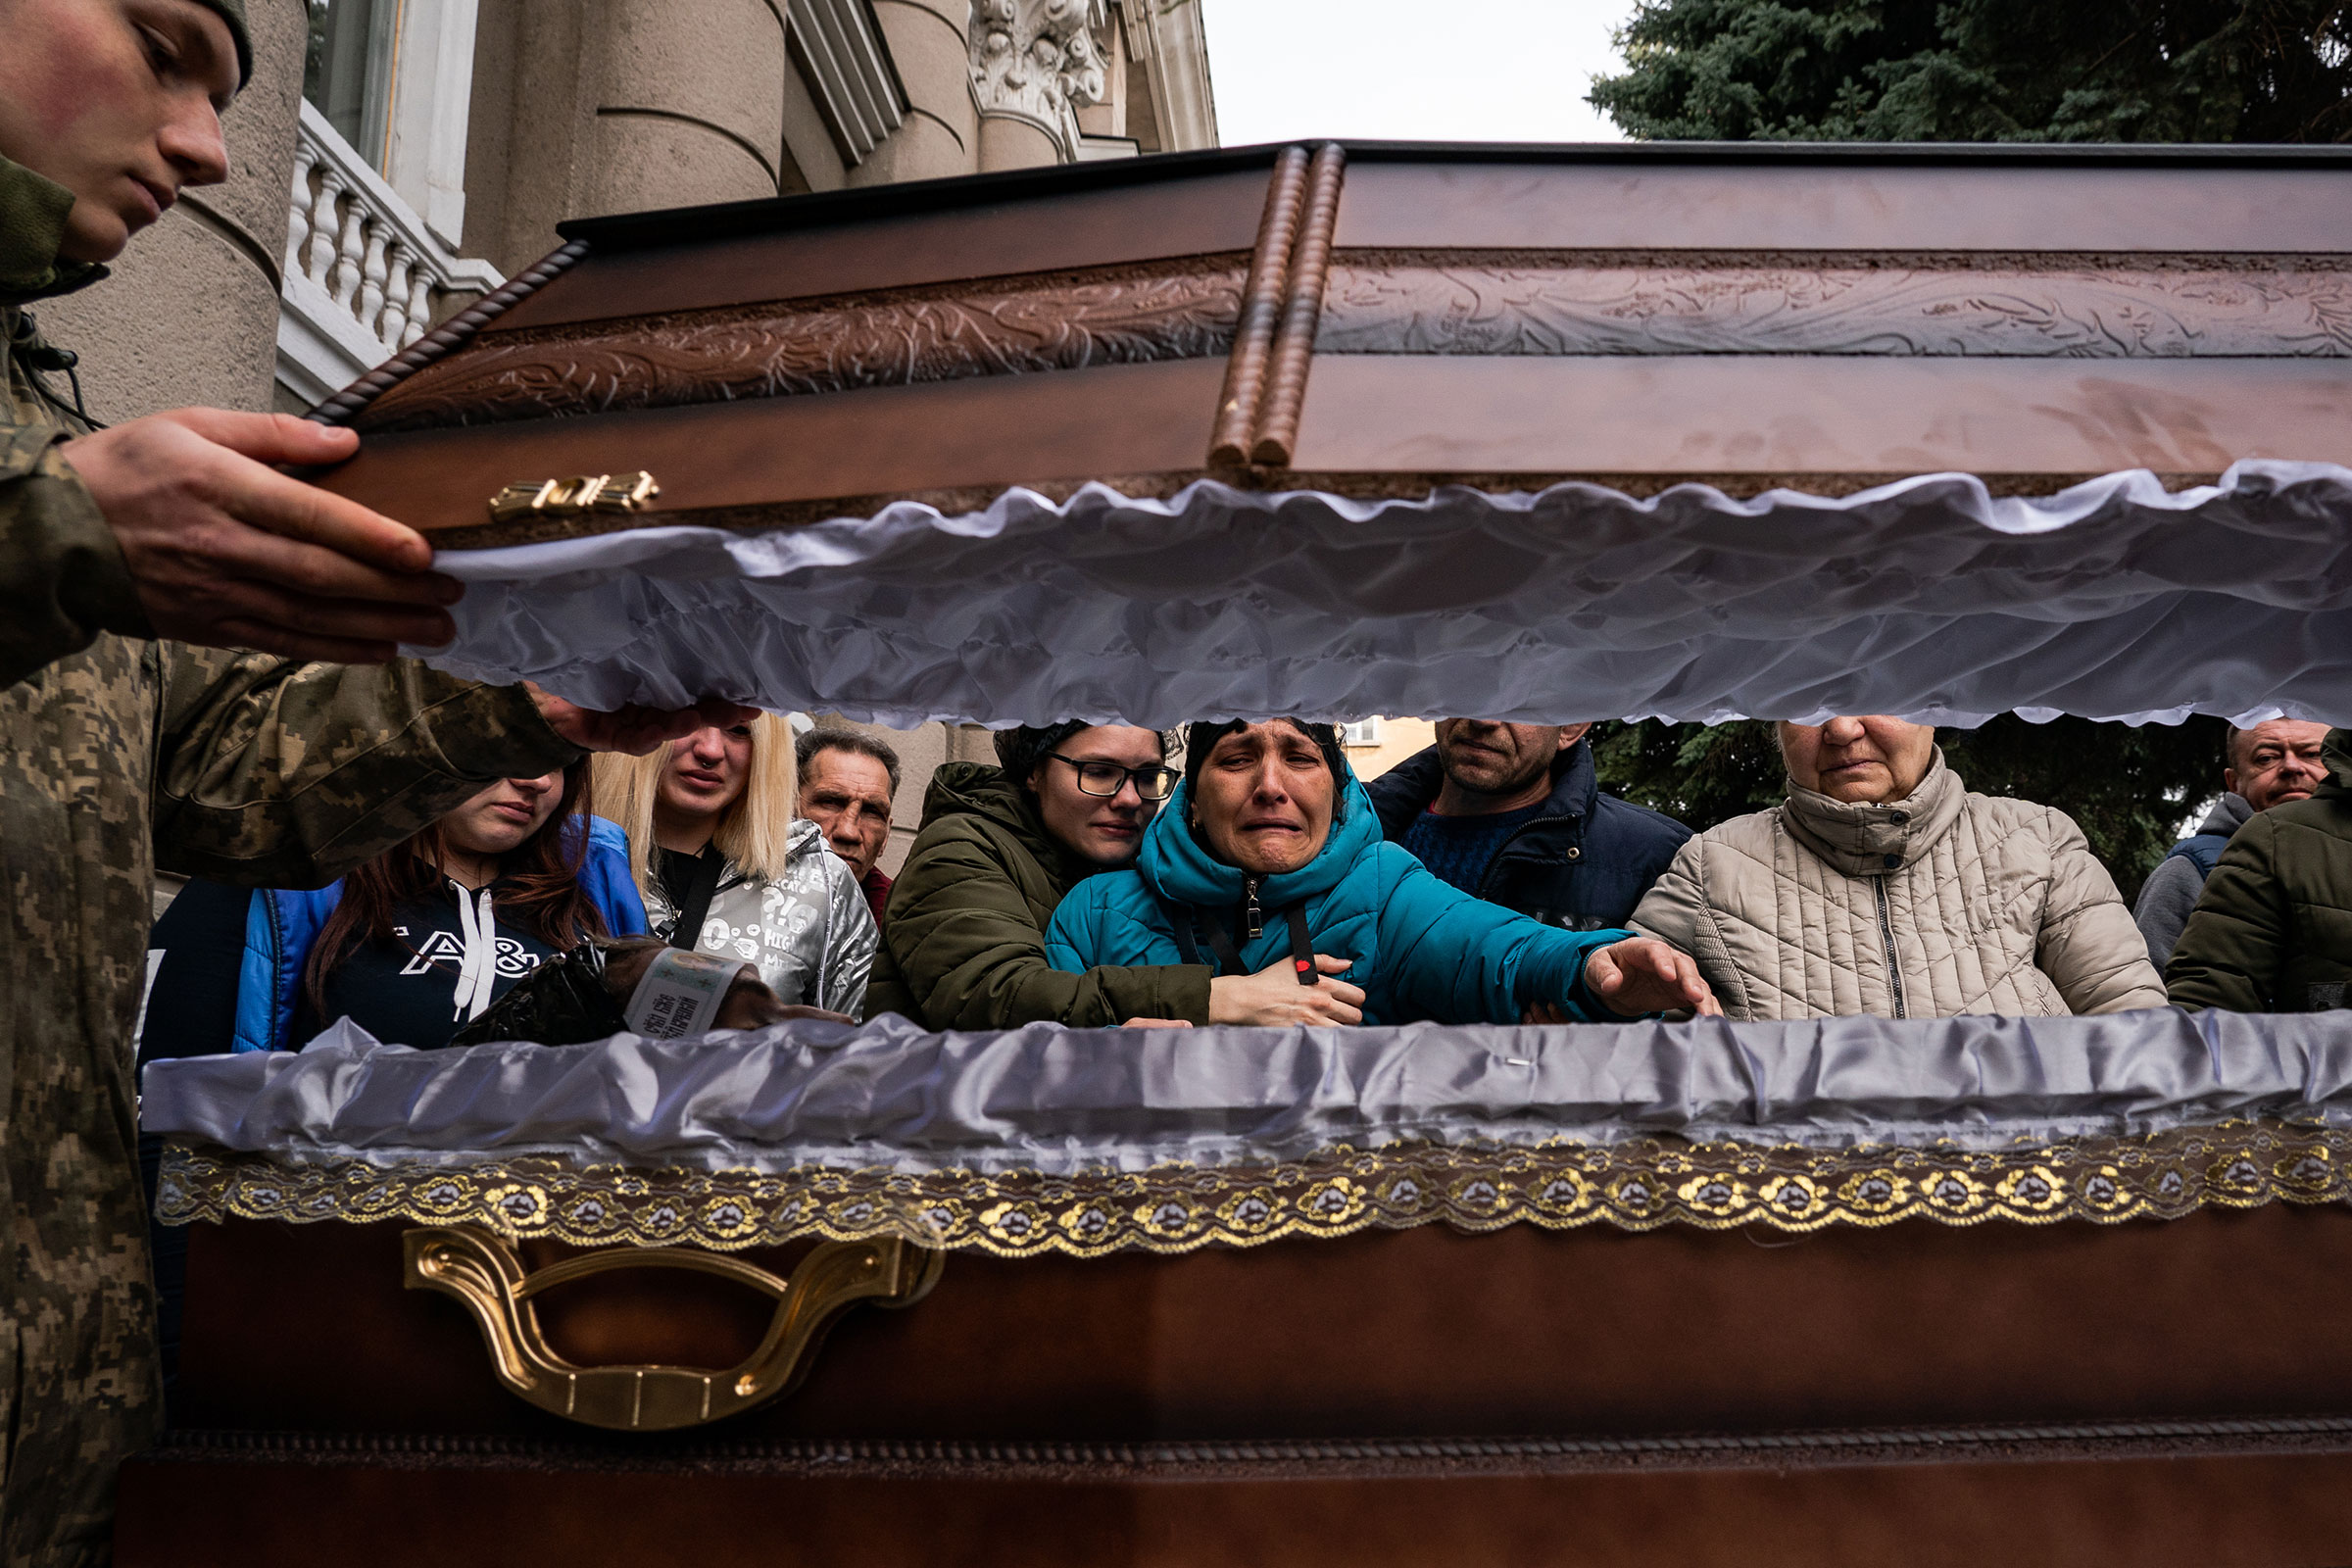 Family of Ukrainian soldier Ivan Lipskiy grieve at his casket during a military service of 5 Ukrainian soldiers in Odessa, Ukraine, on March 29. Lipskiy was killed on March 18 during a Russian airstrike that hit the 36th Ukrainian Naval Infantry Brigade killing more than 40 Ukrainian soldiers in the city of Mykolaiv. (Salwan Georges—The Washington Post/Getty Images)